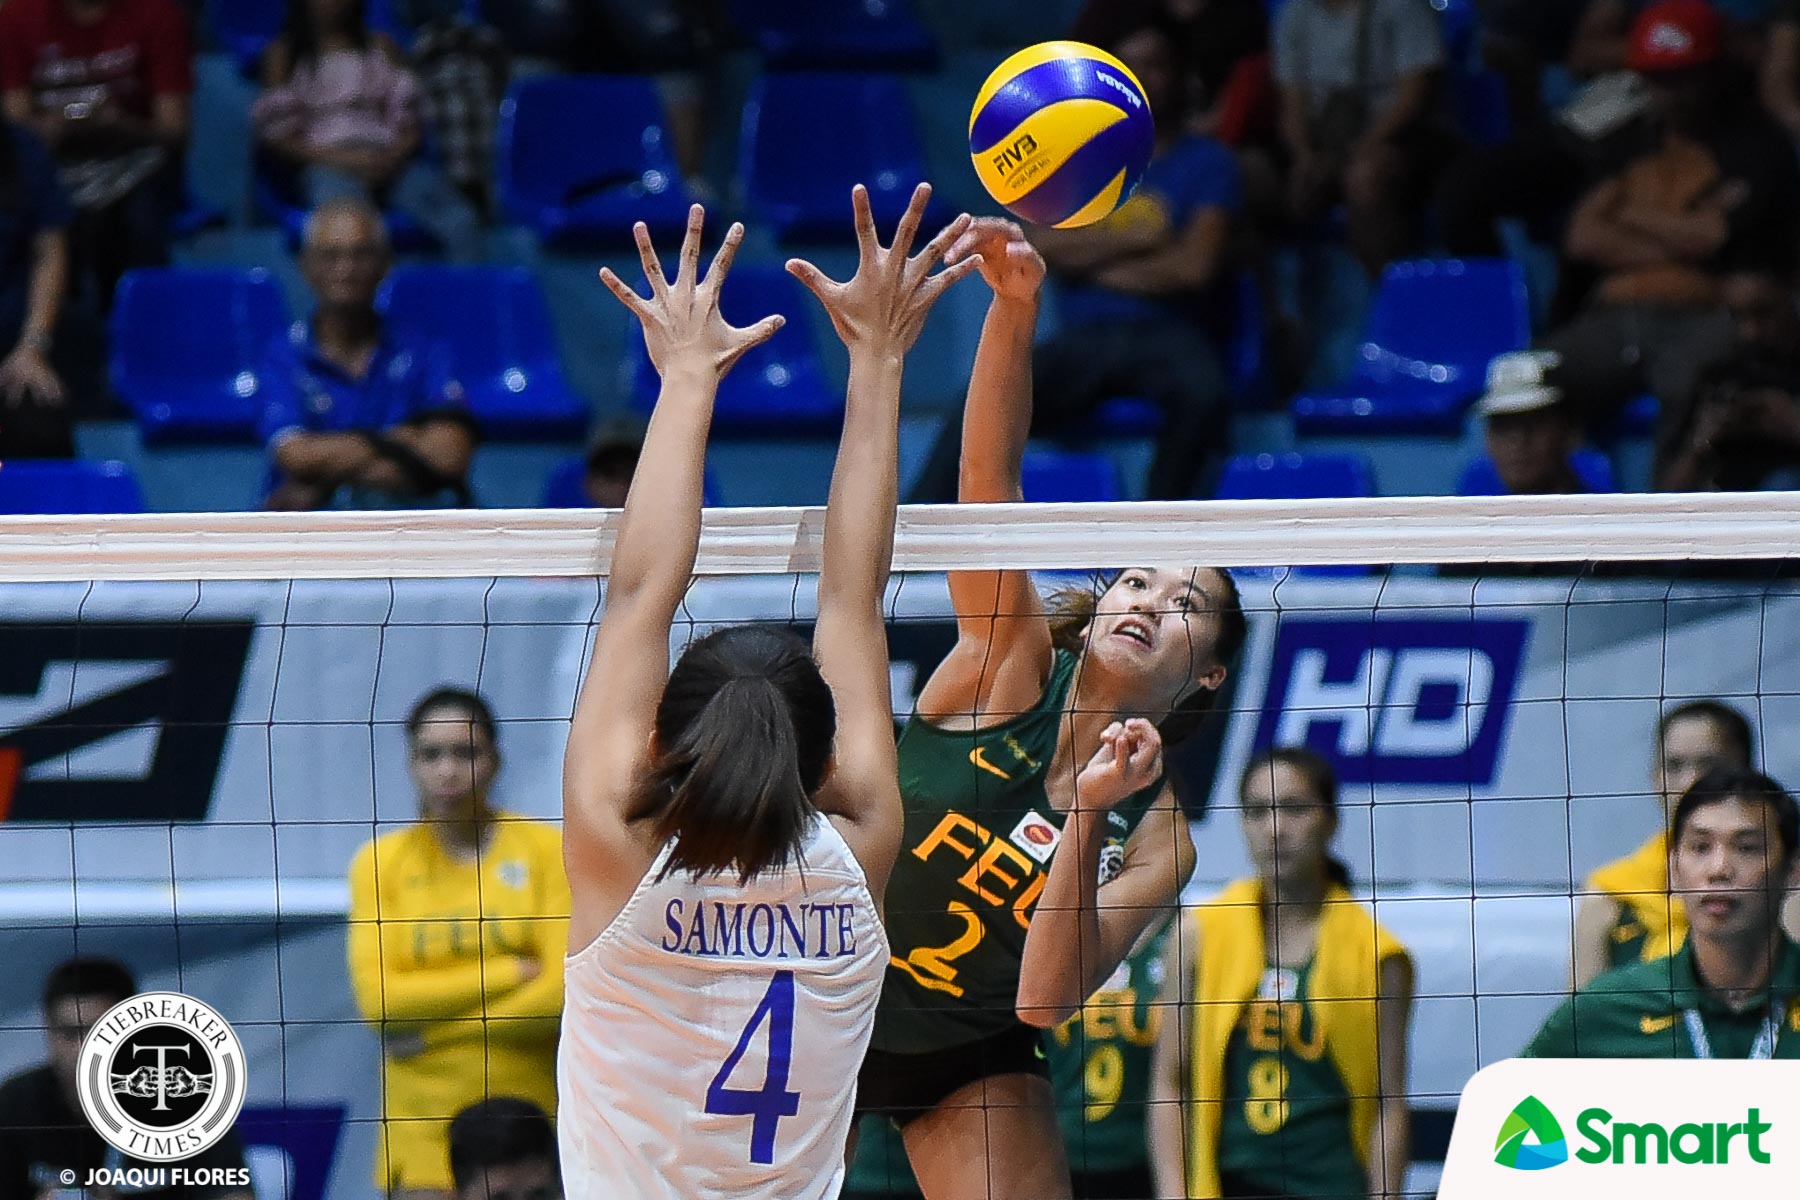 UAAP-80-Volleyball-ADMU-vs.-FEU-Pons-0625 FEU's desire did not match their performance, says Bernadeth Pons News UAAP UST Volleyball  - philippine sports news